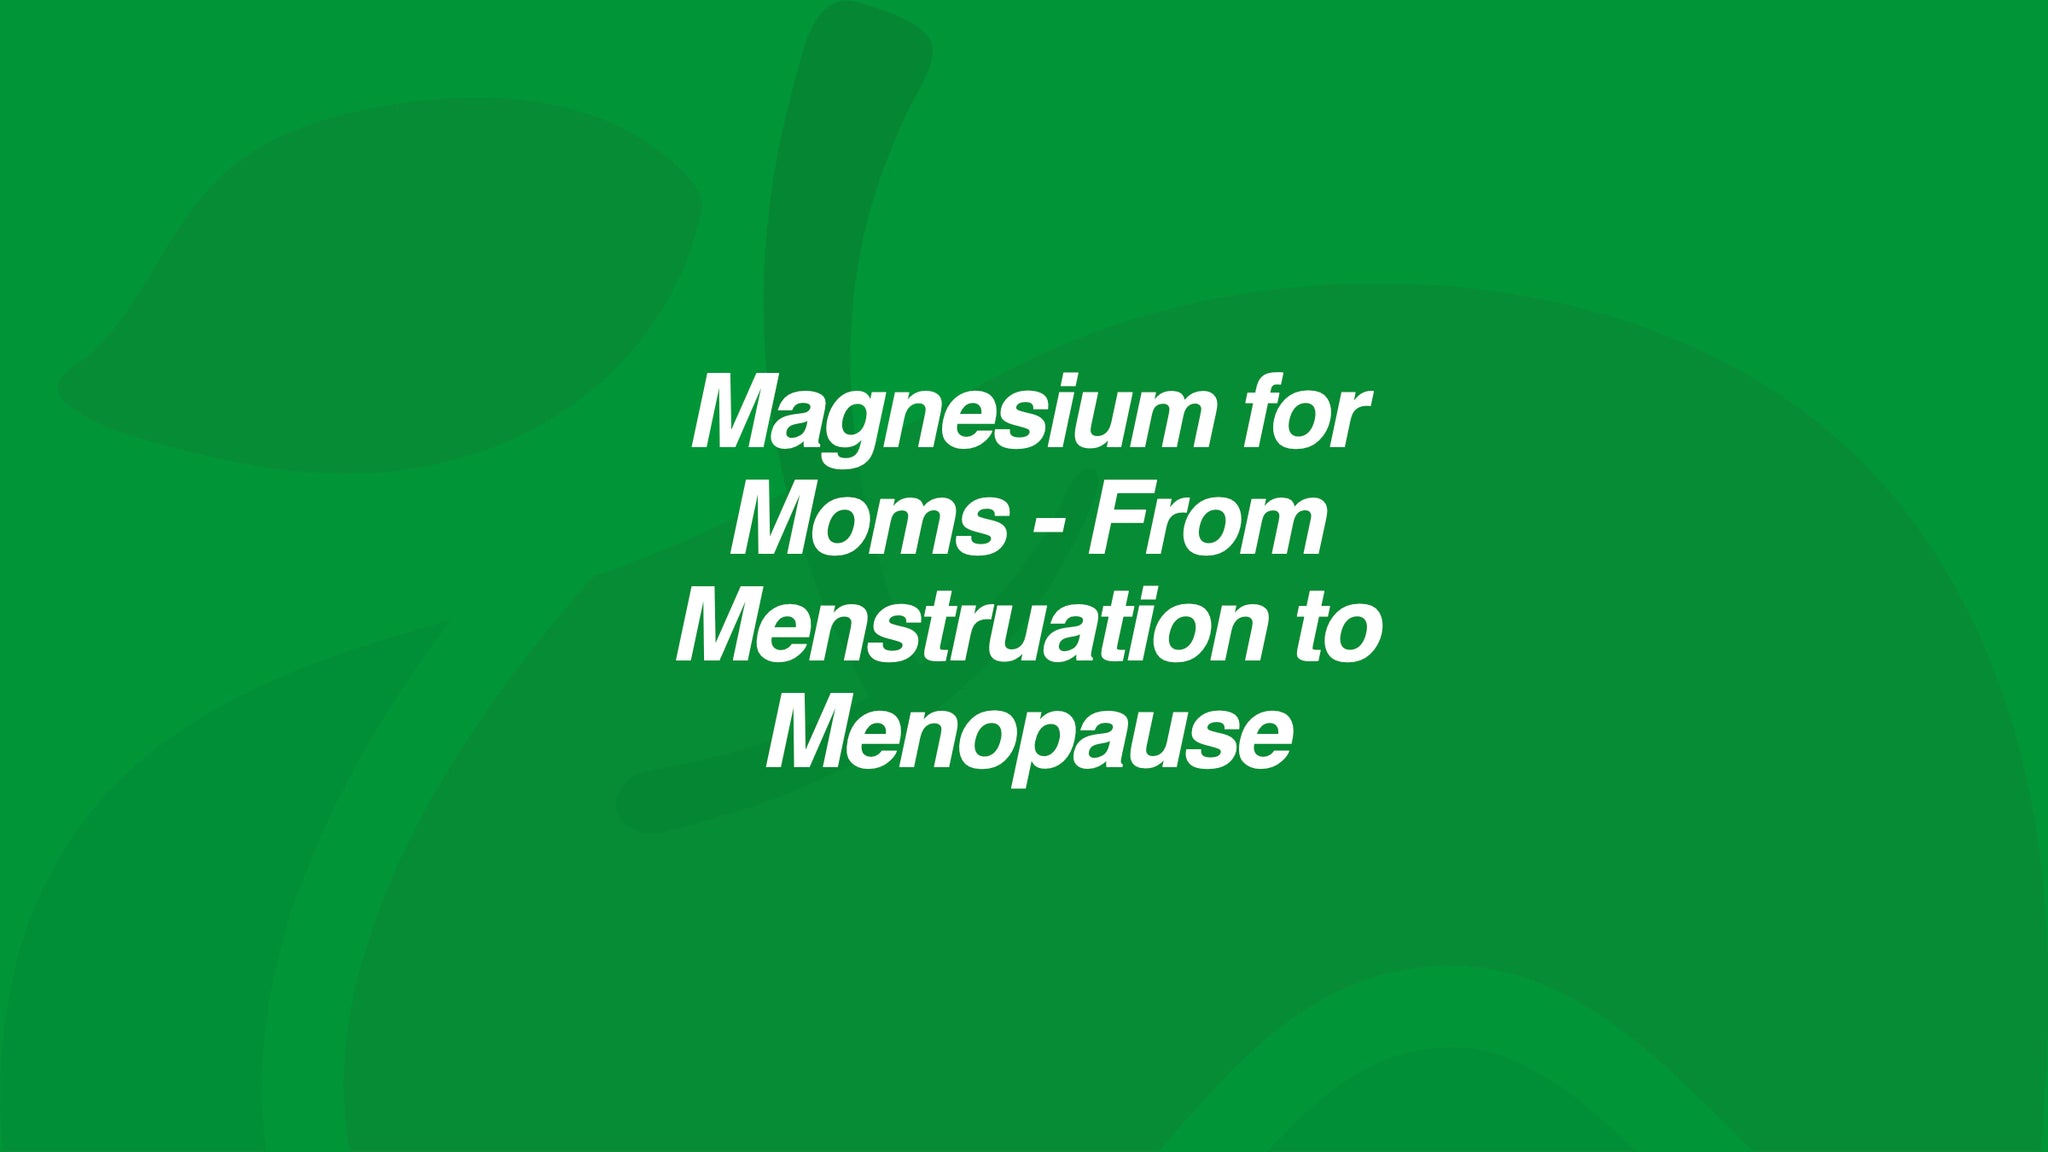 Magnesium for Moms - From Menstruation to Menopause